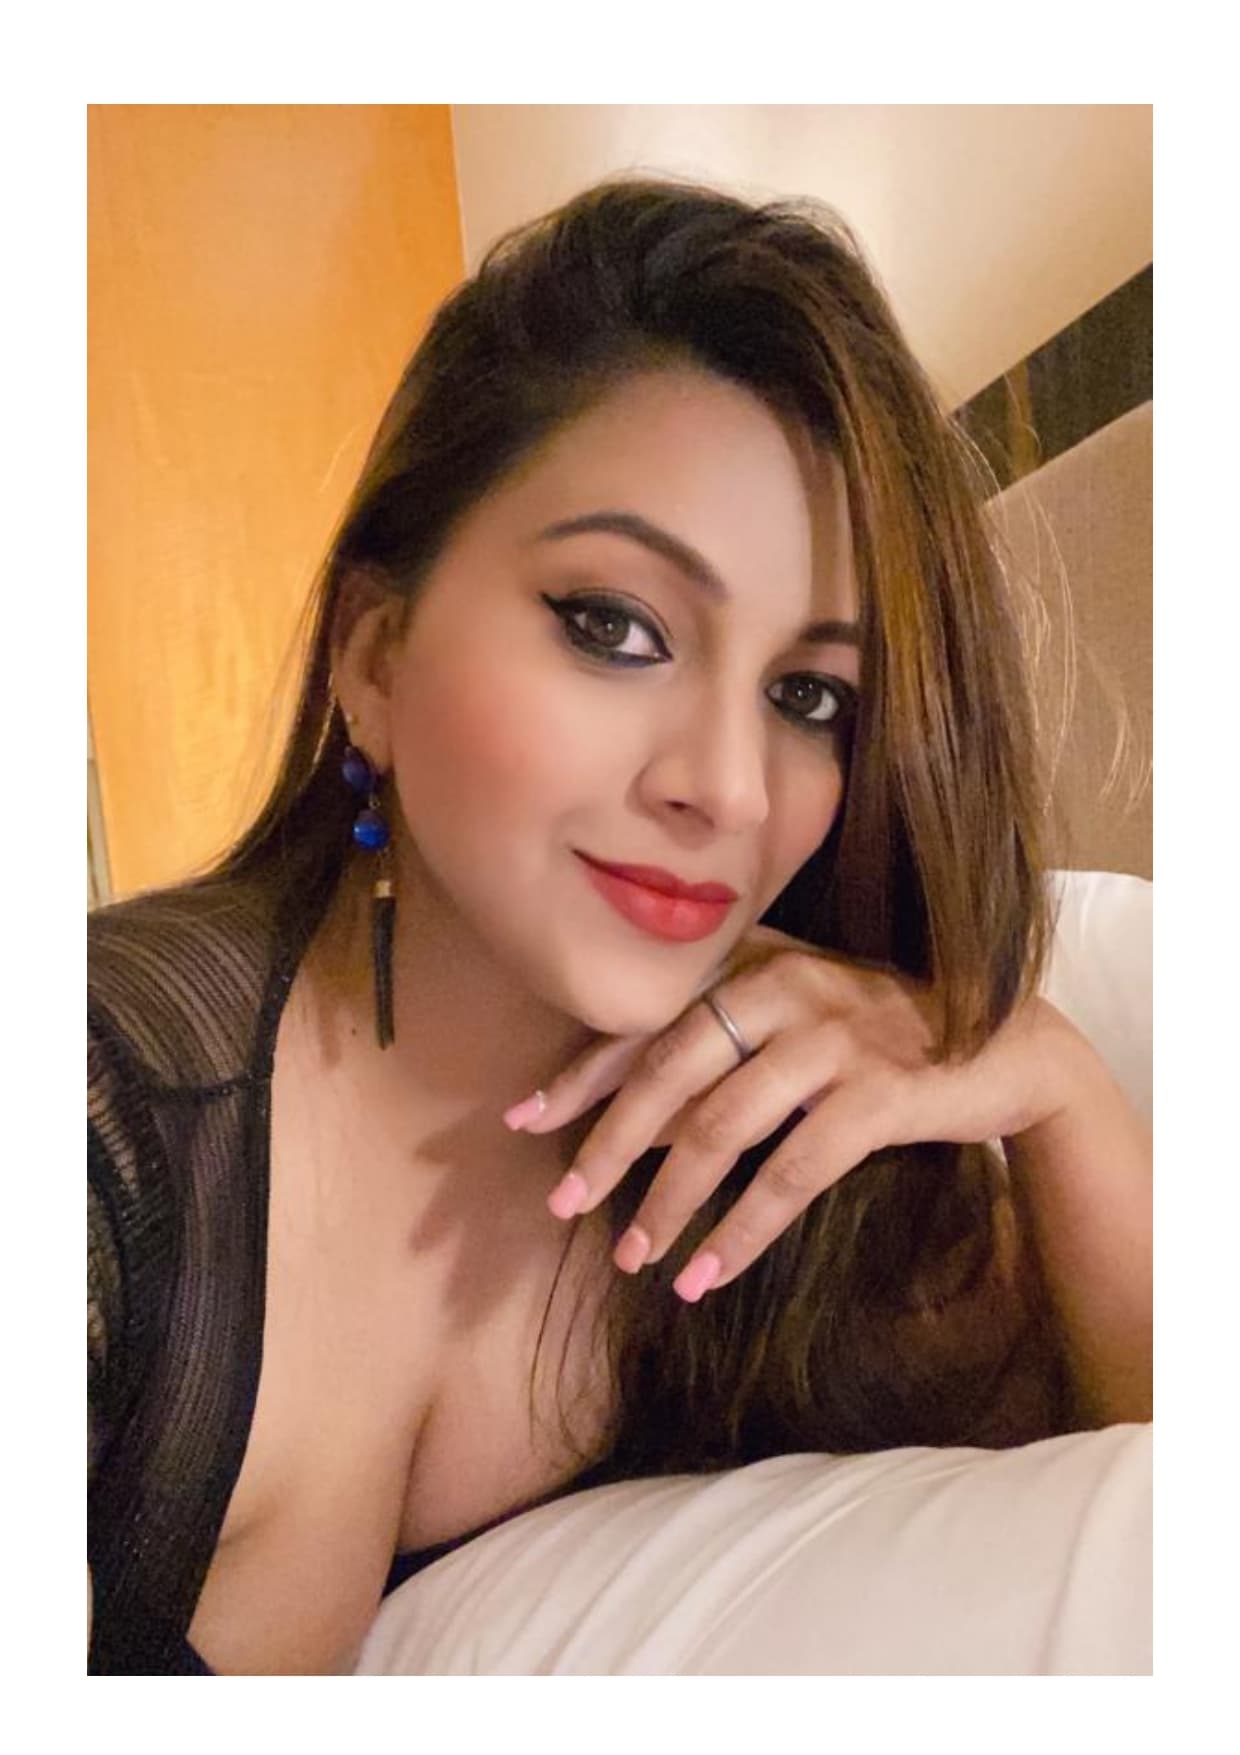 High profile Call girls in Ludhiana available 24/7